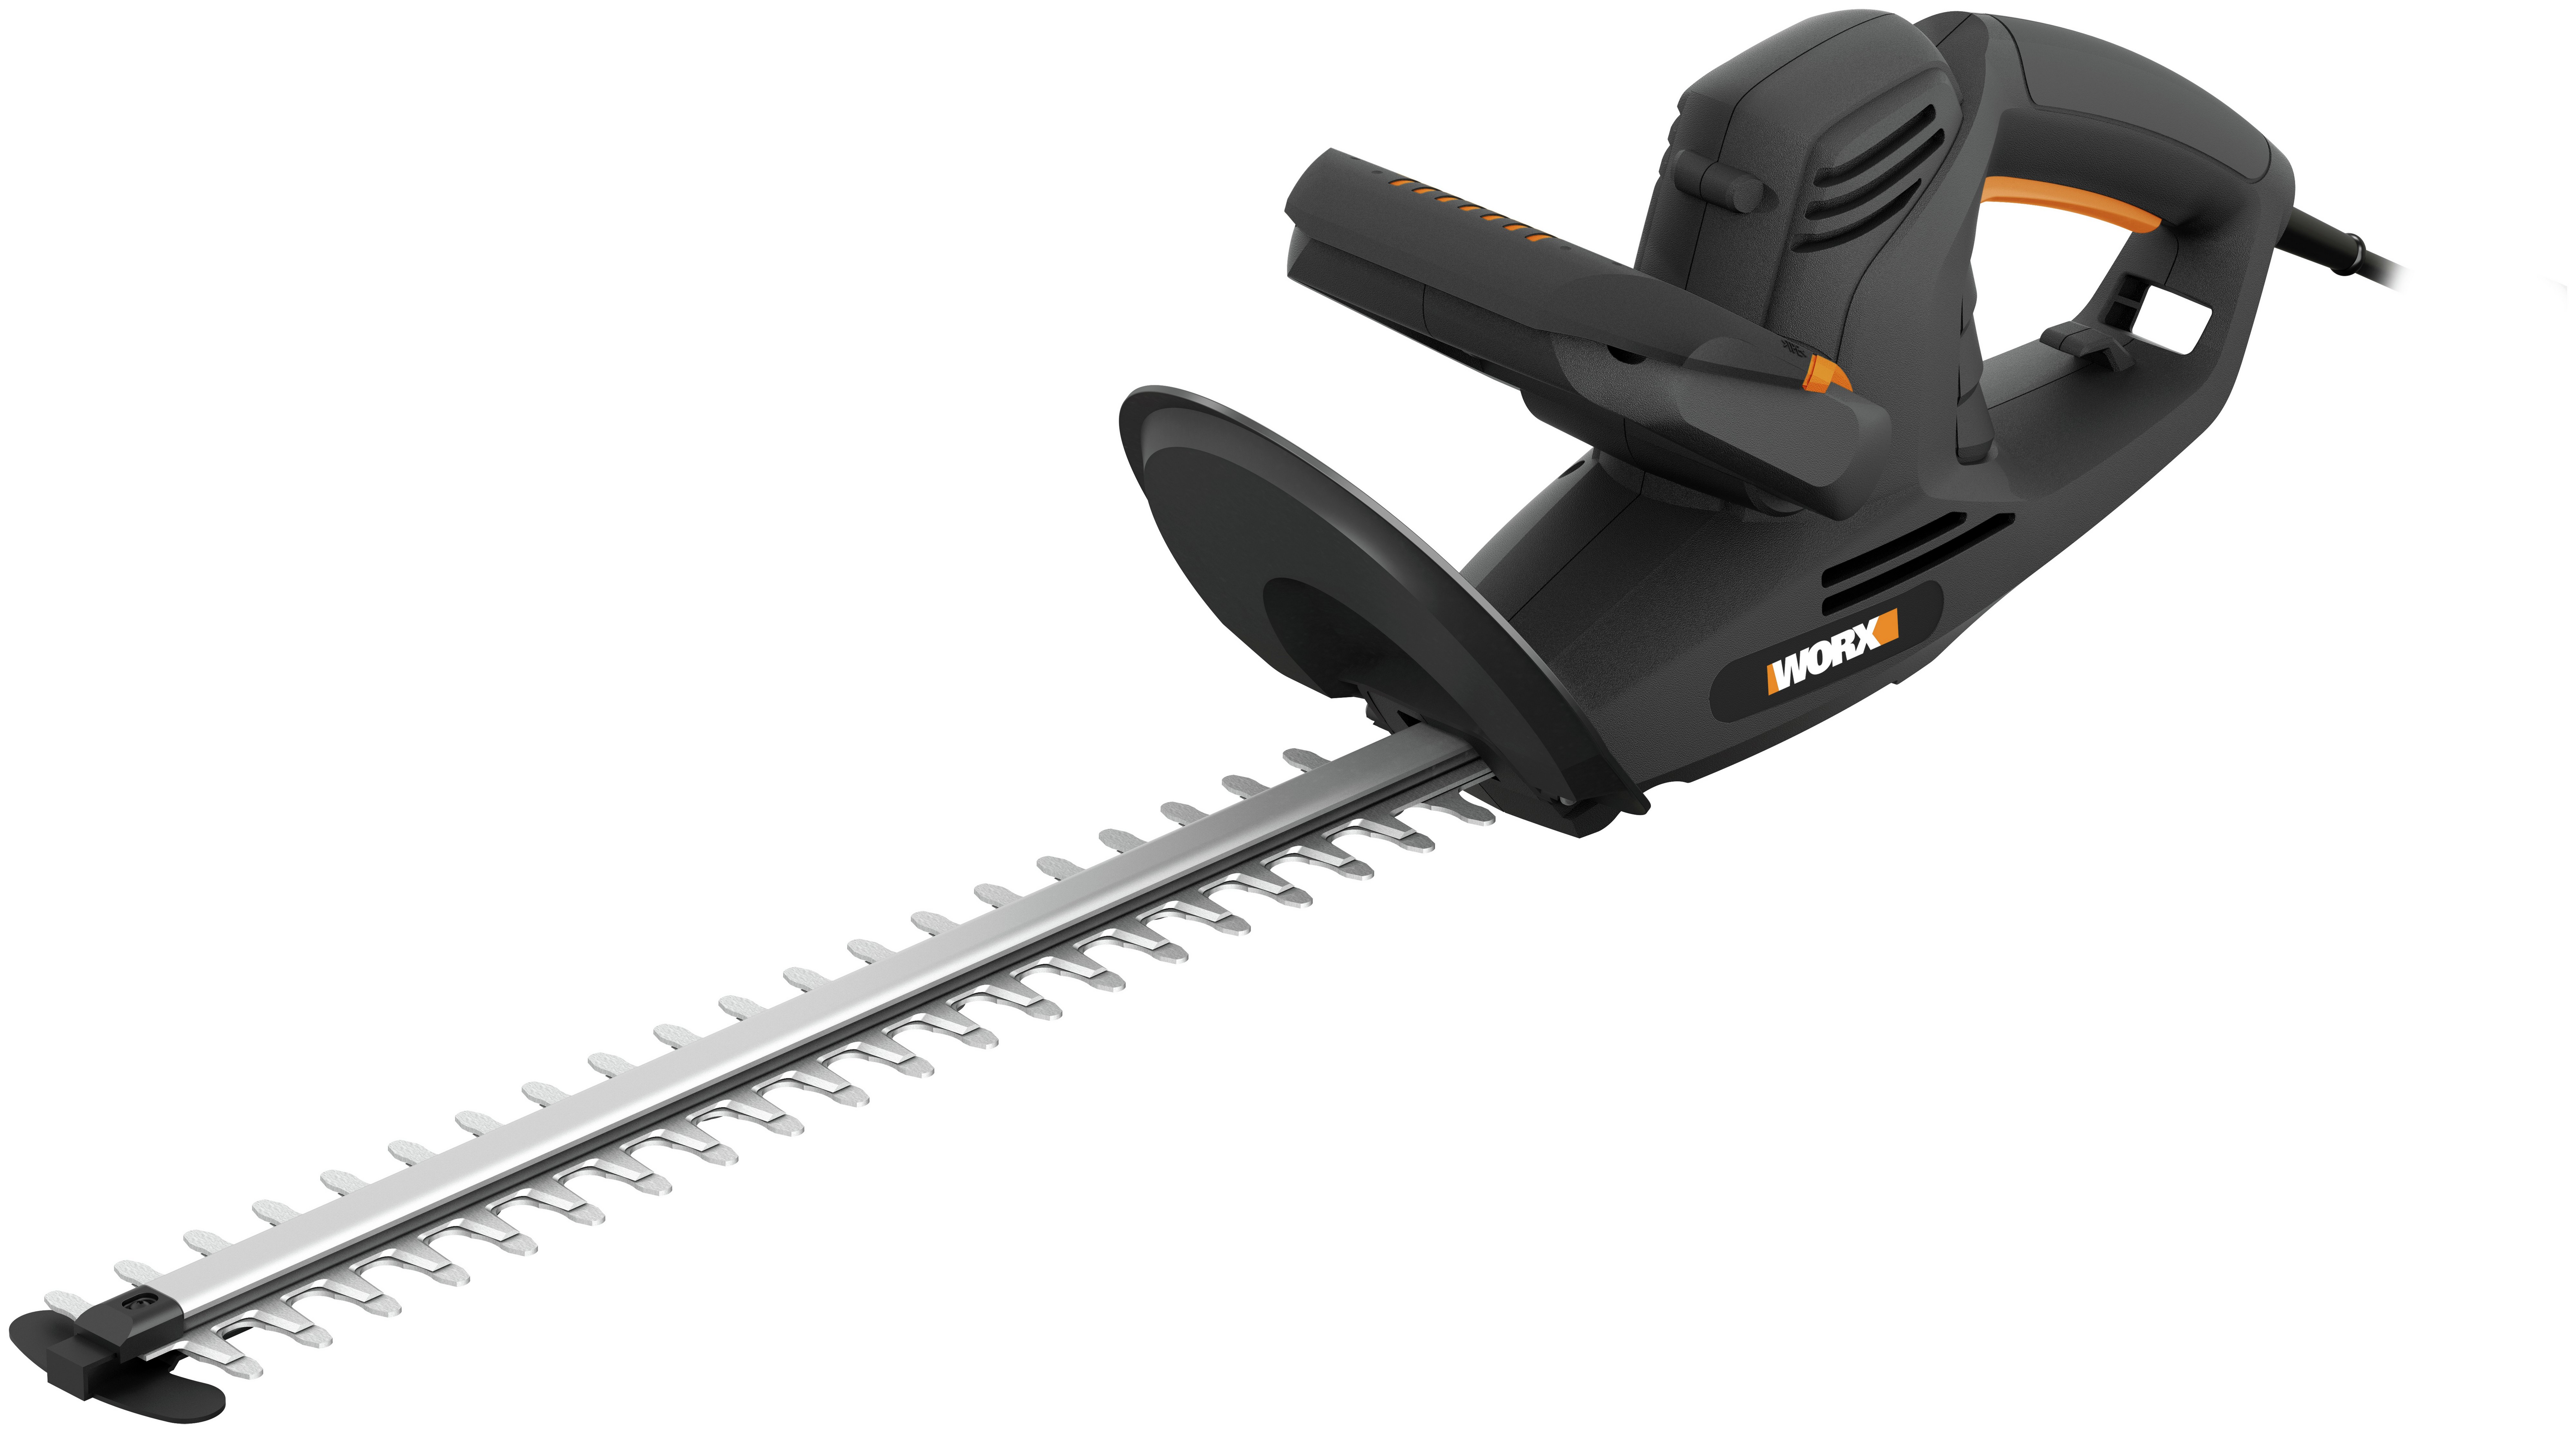 WORX WG213E Corded Hedge Trimmer - 450W. Review